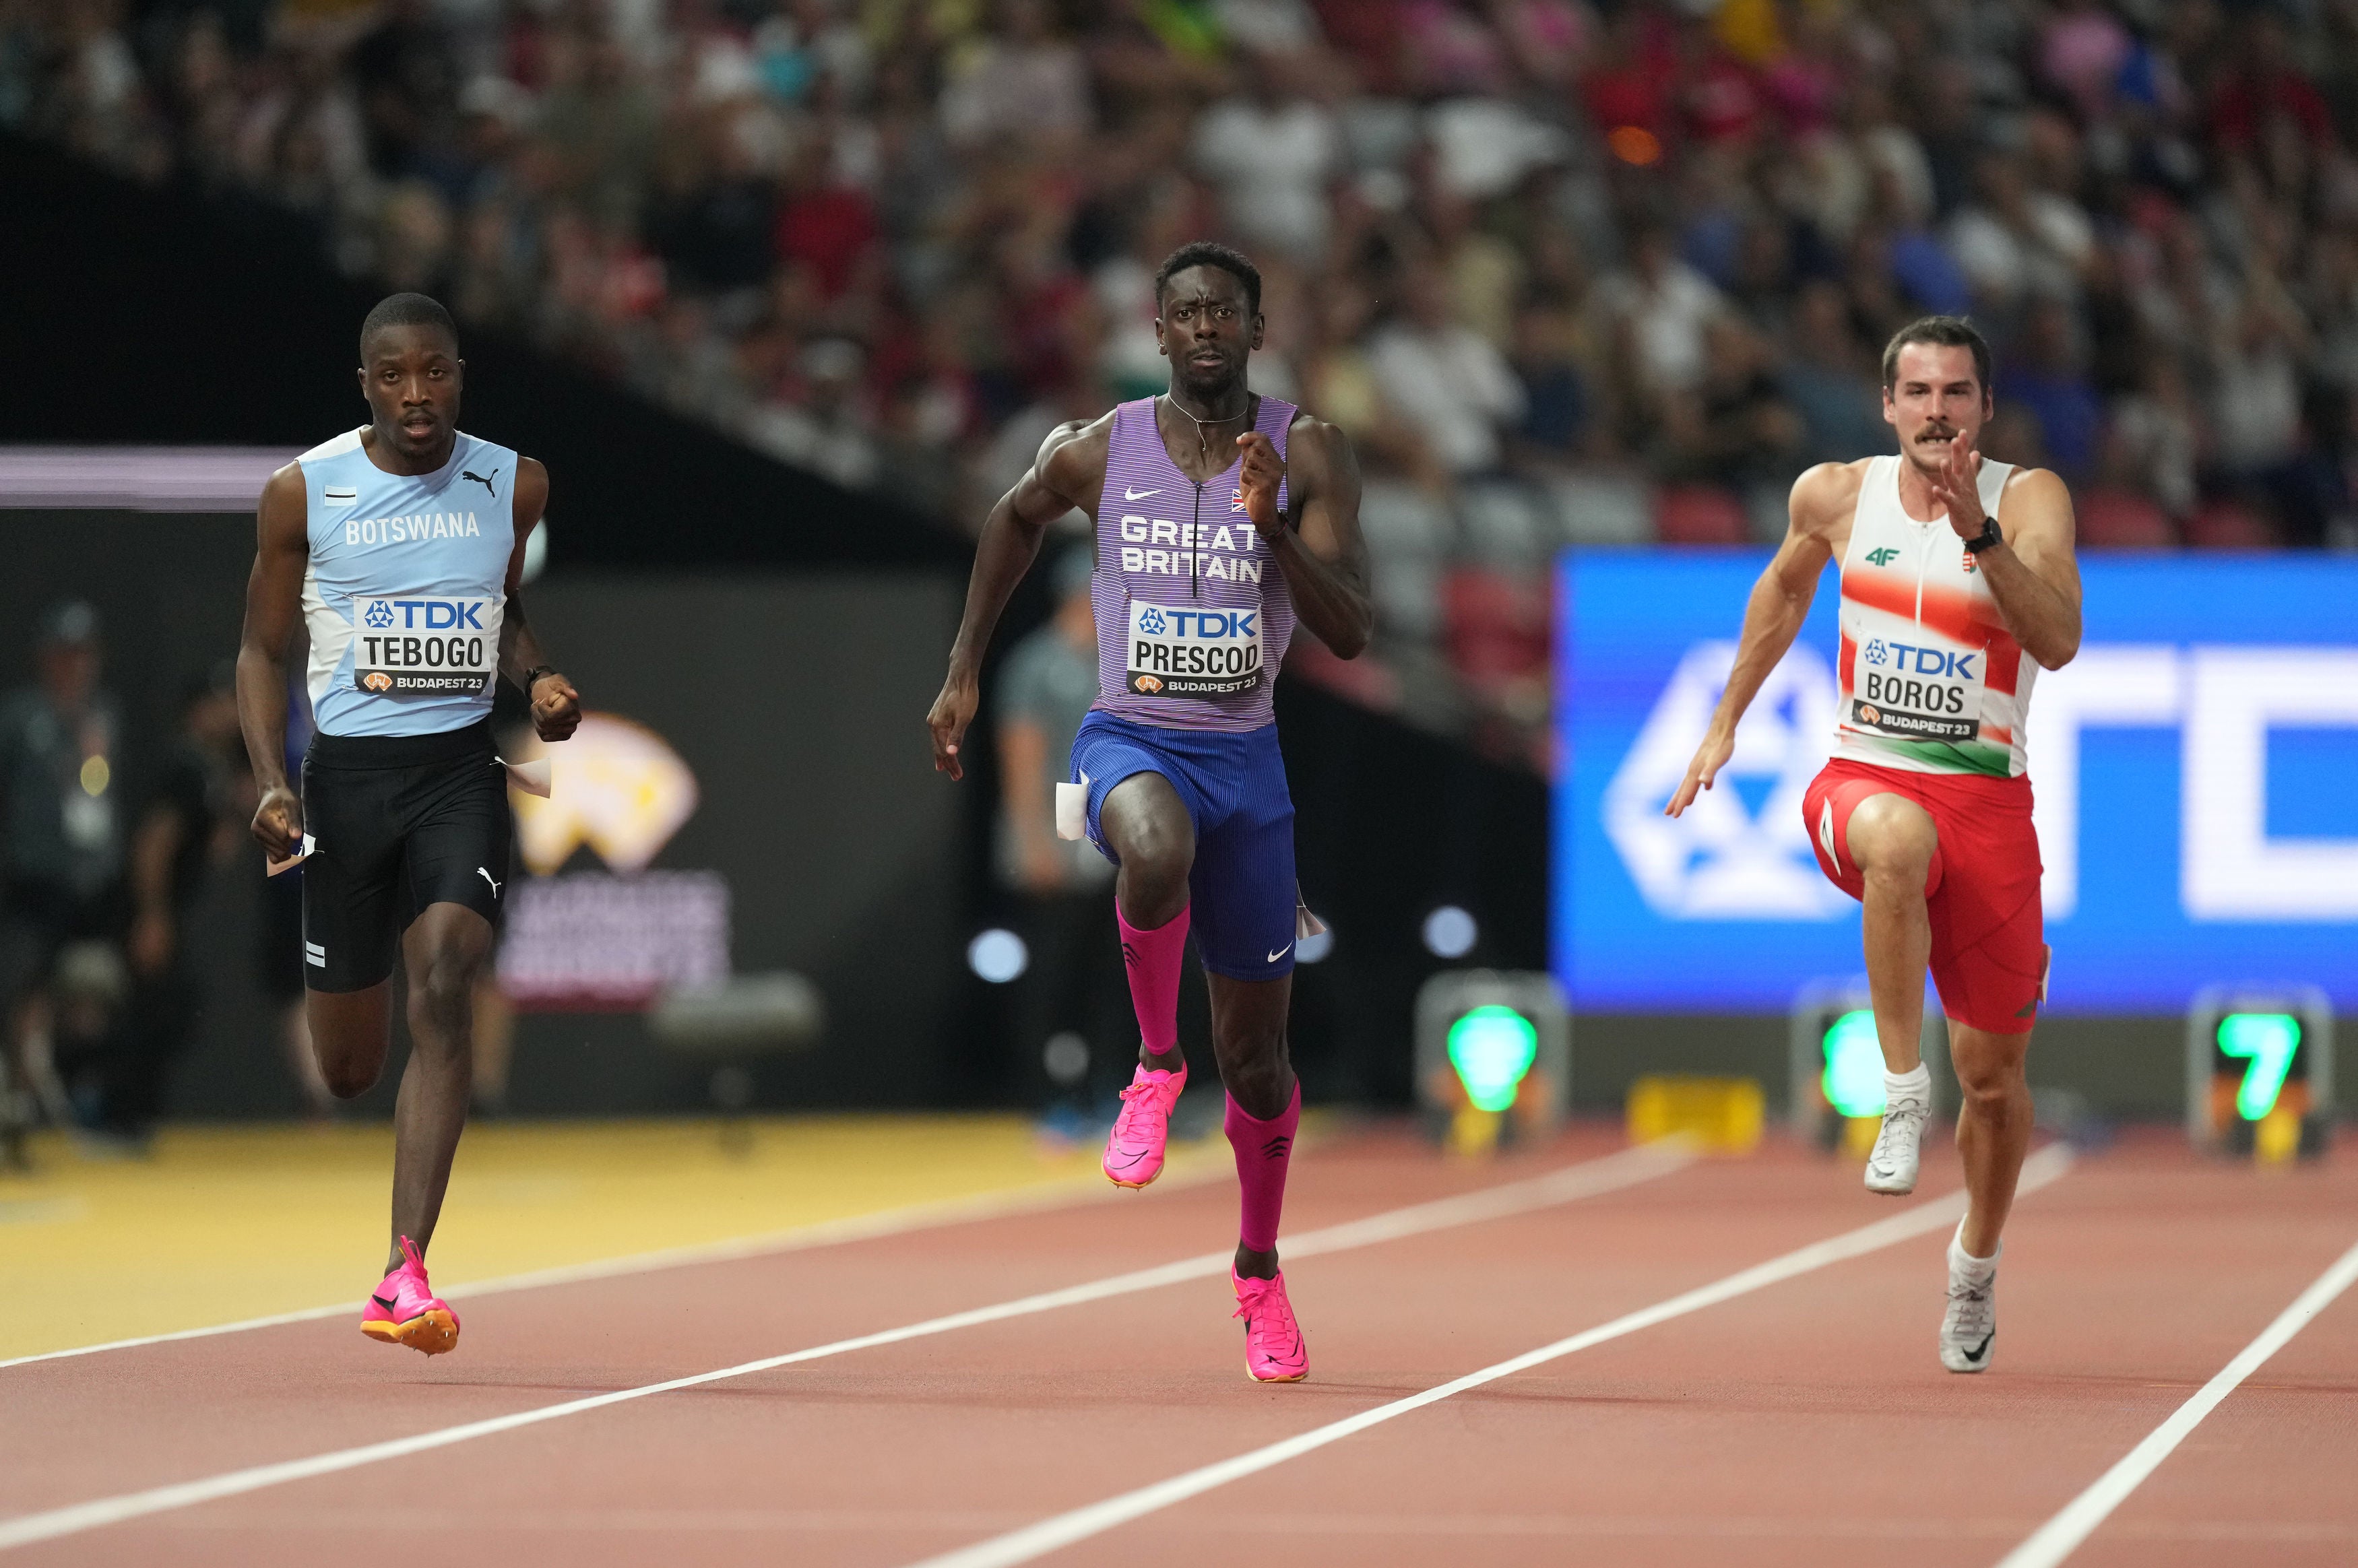 Prescod qualified from the 100m heats on day one at the Worlds